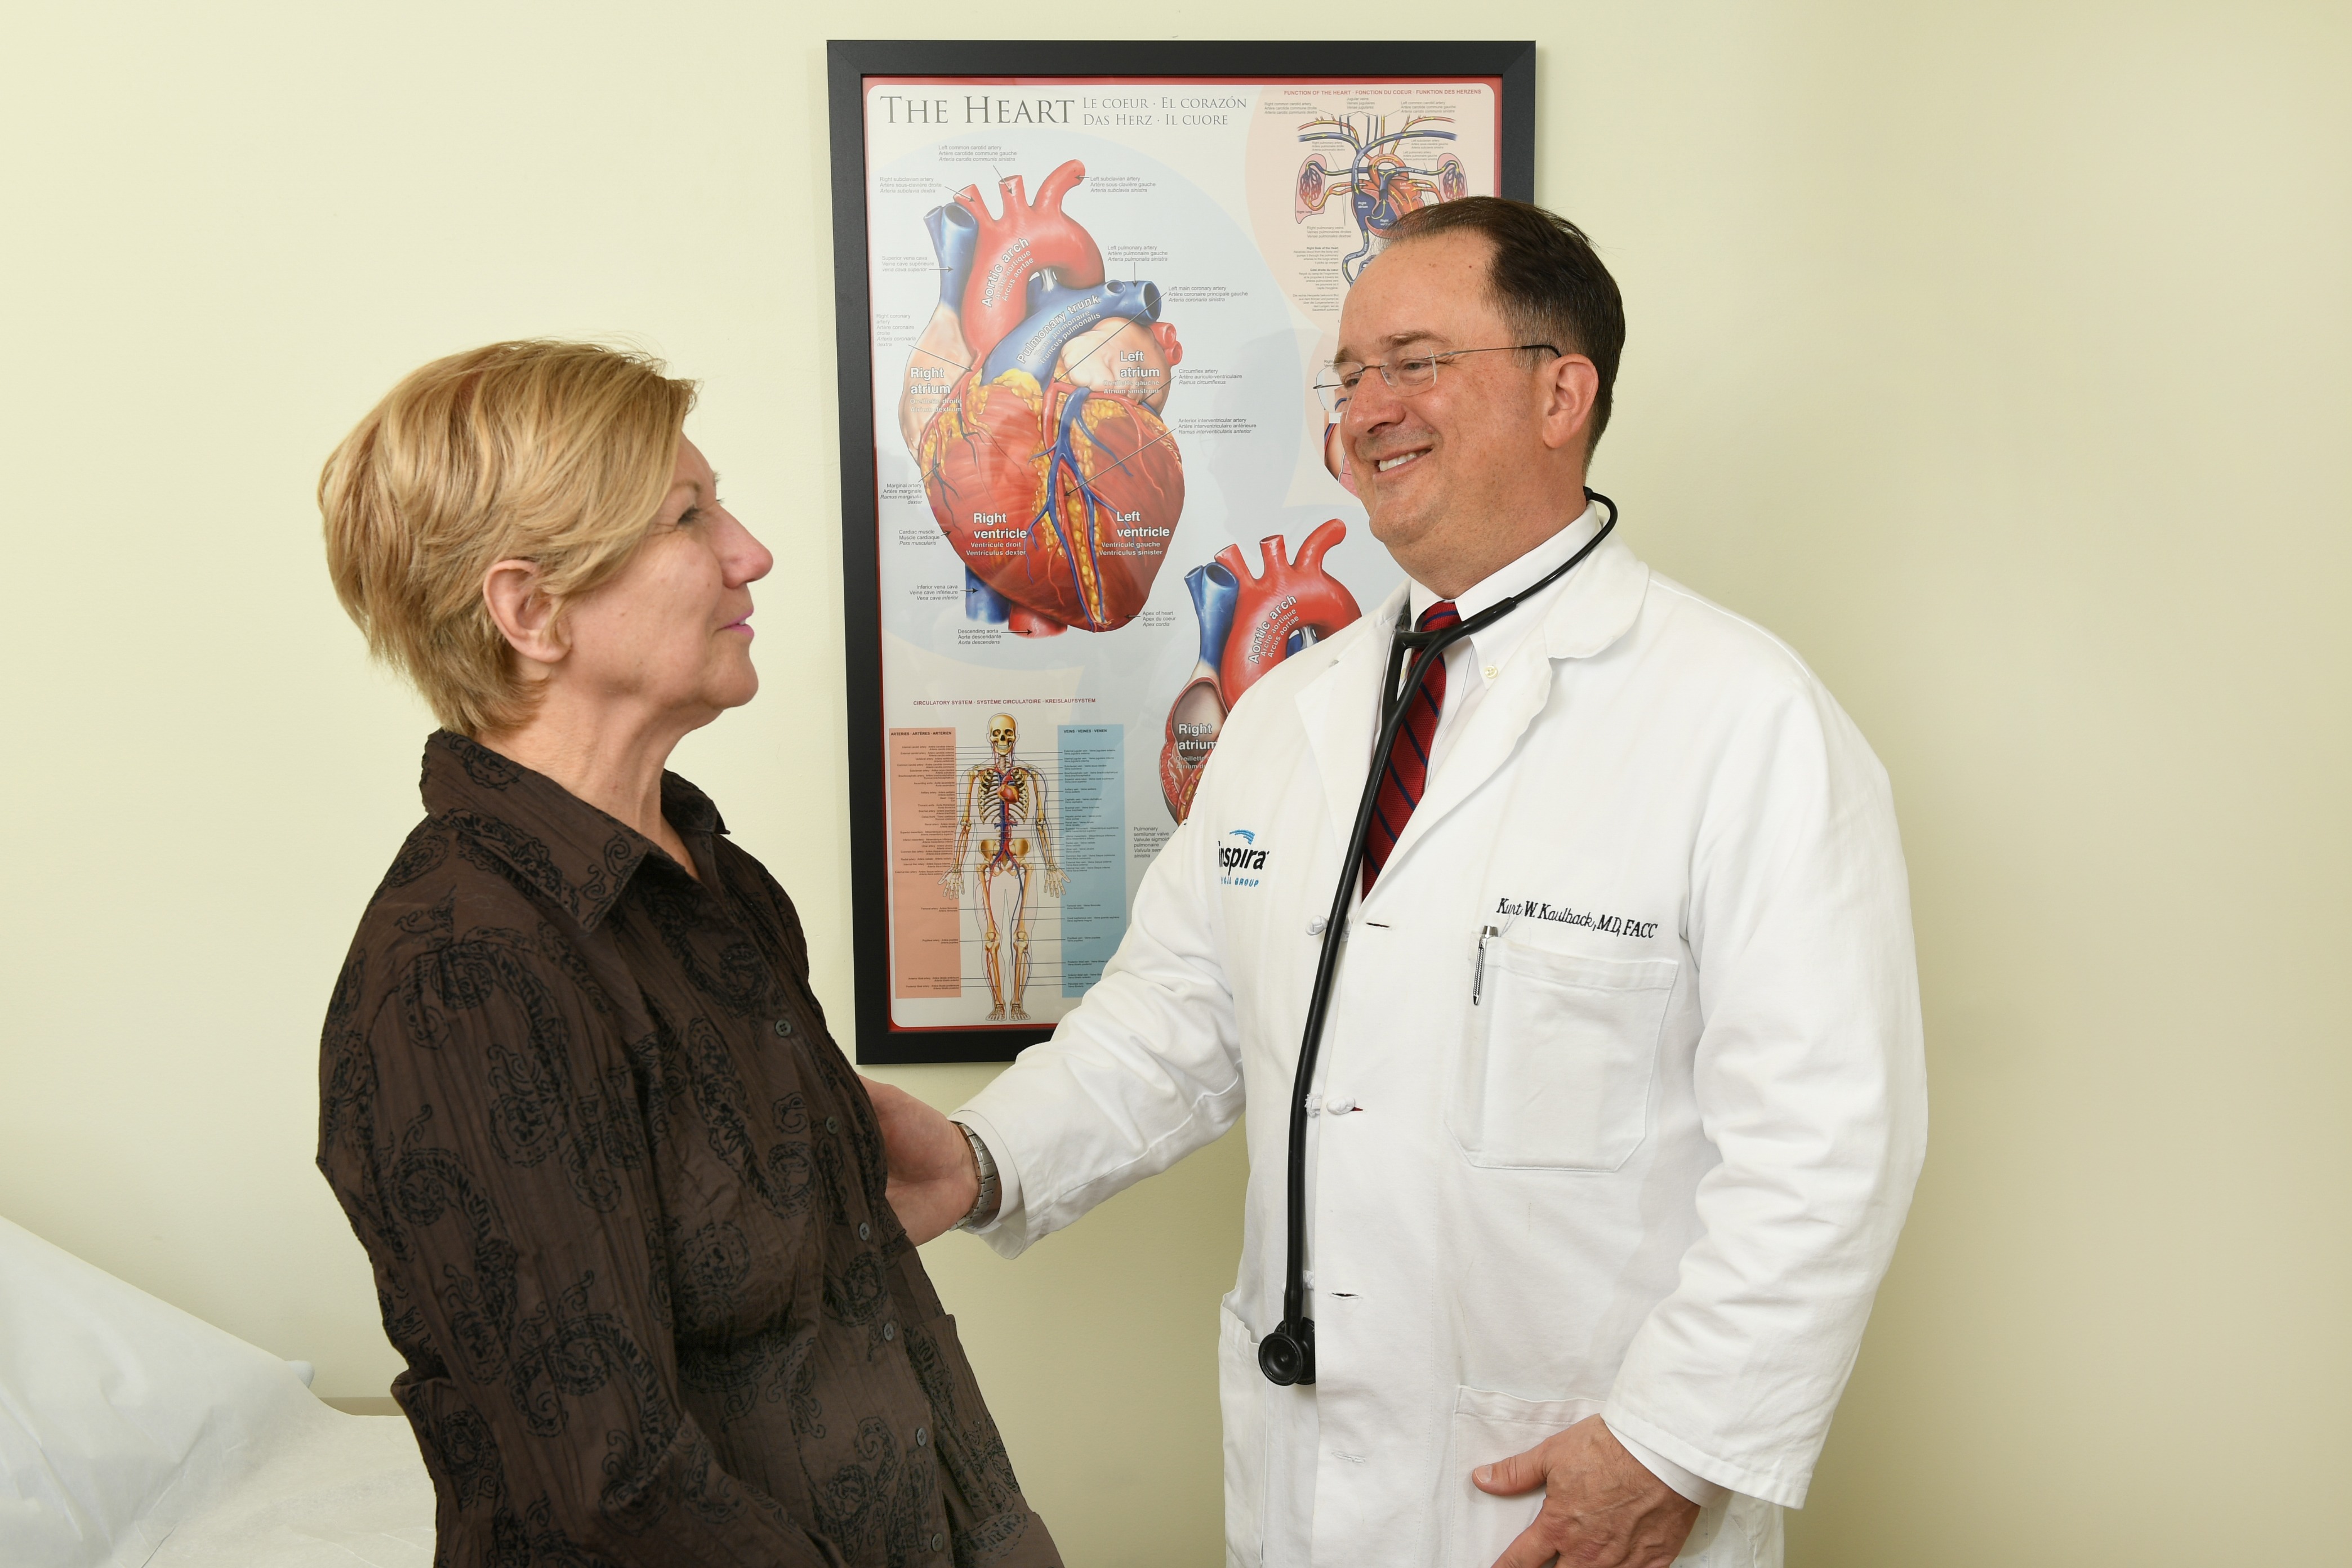 Dr. Kaulbach and a patient